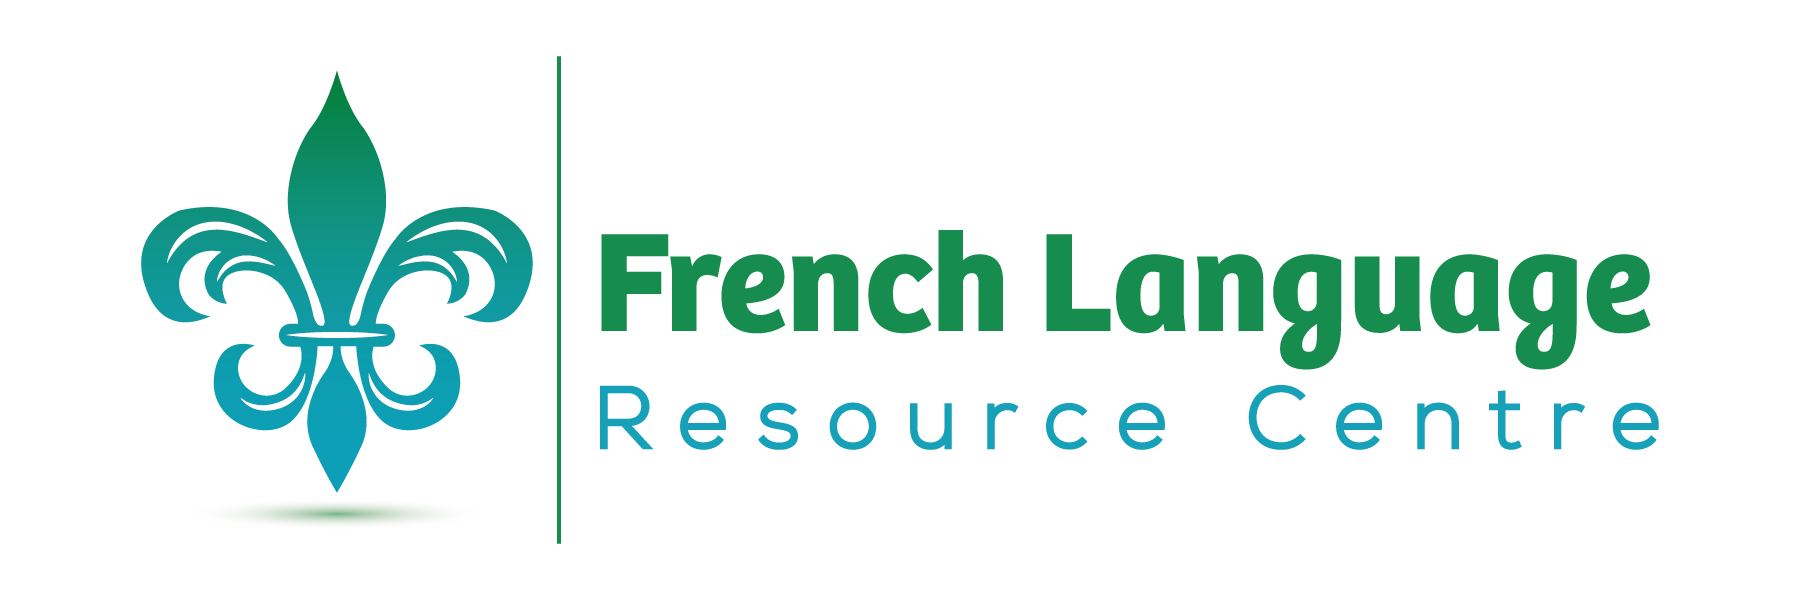 French Language Resource Centre